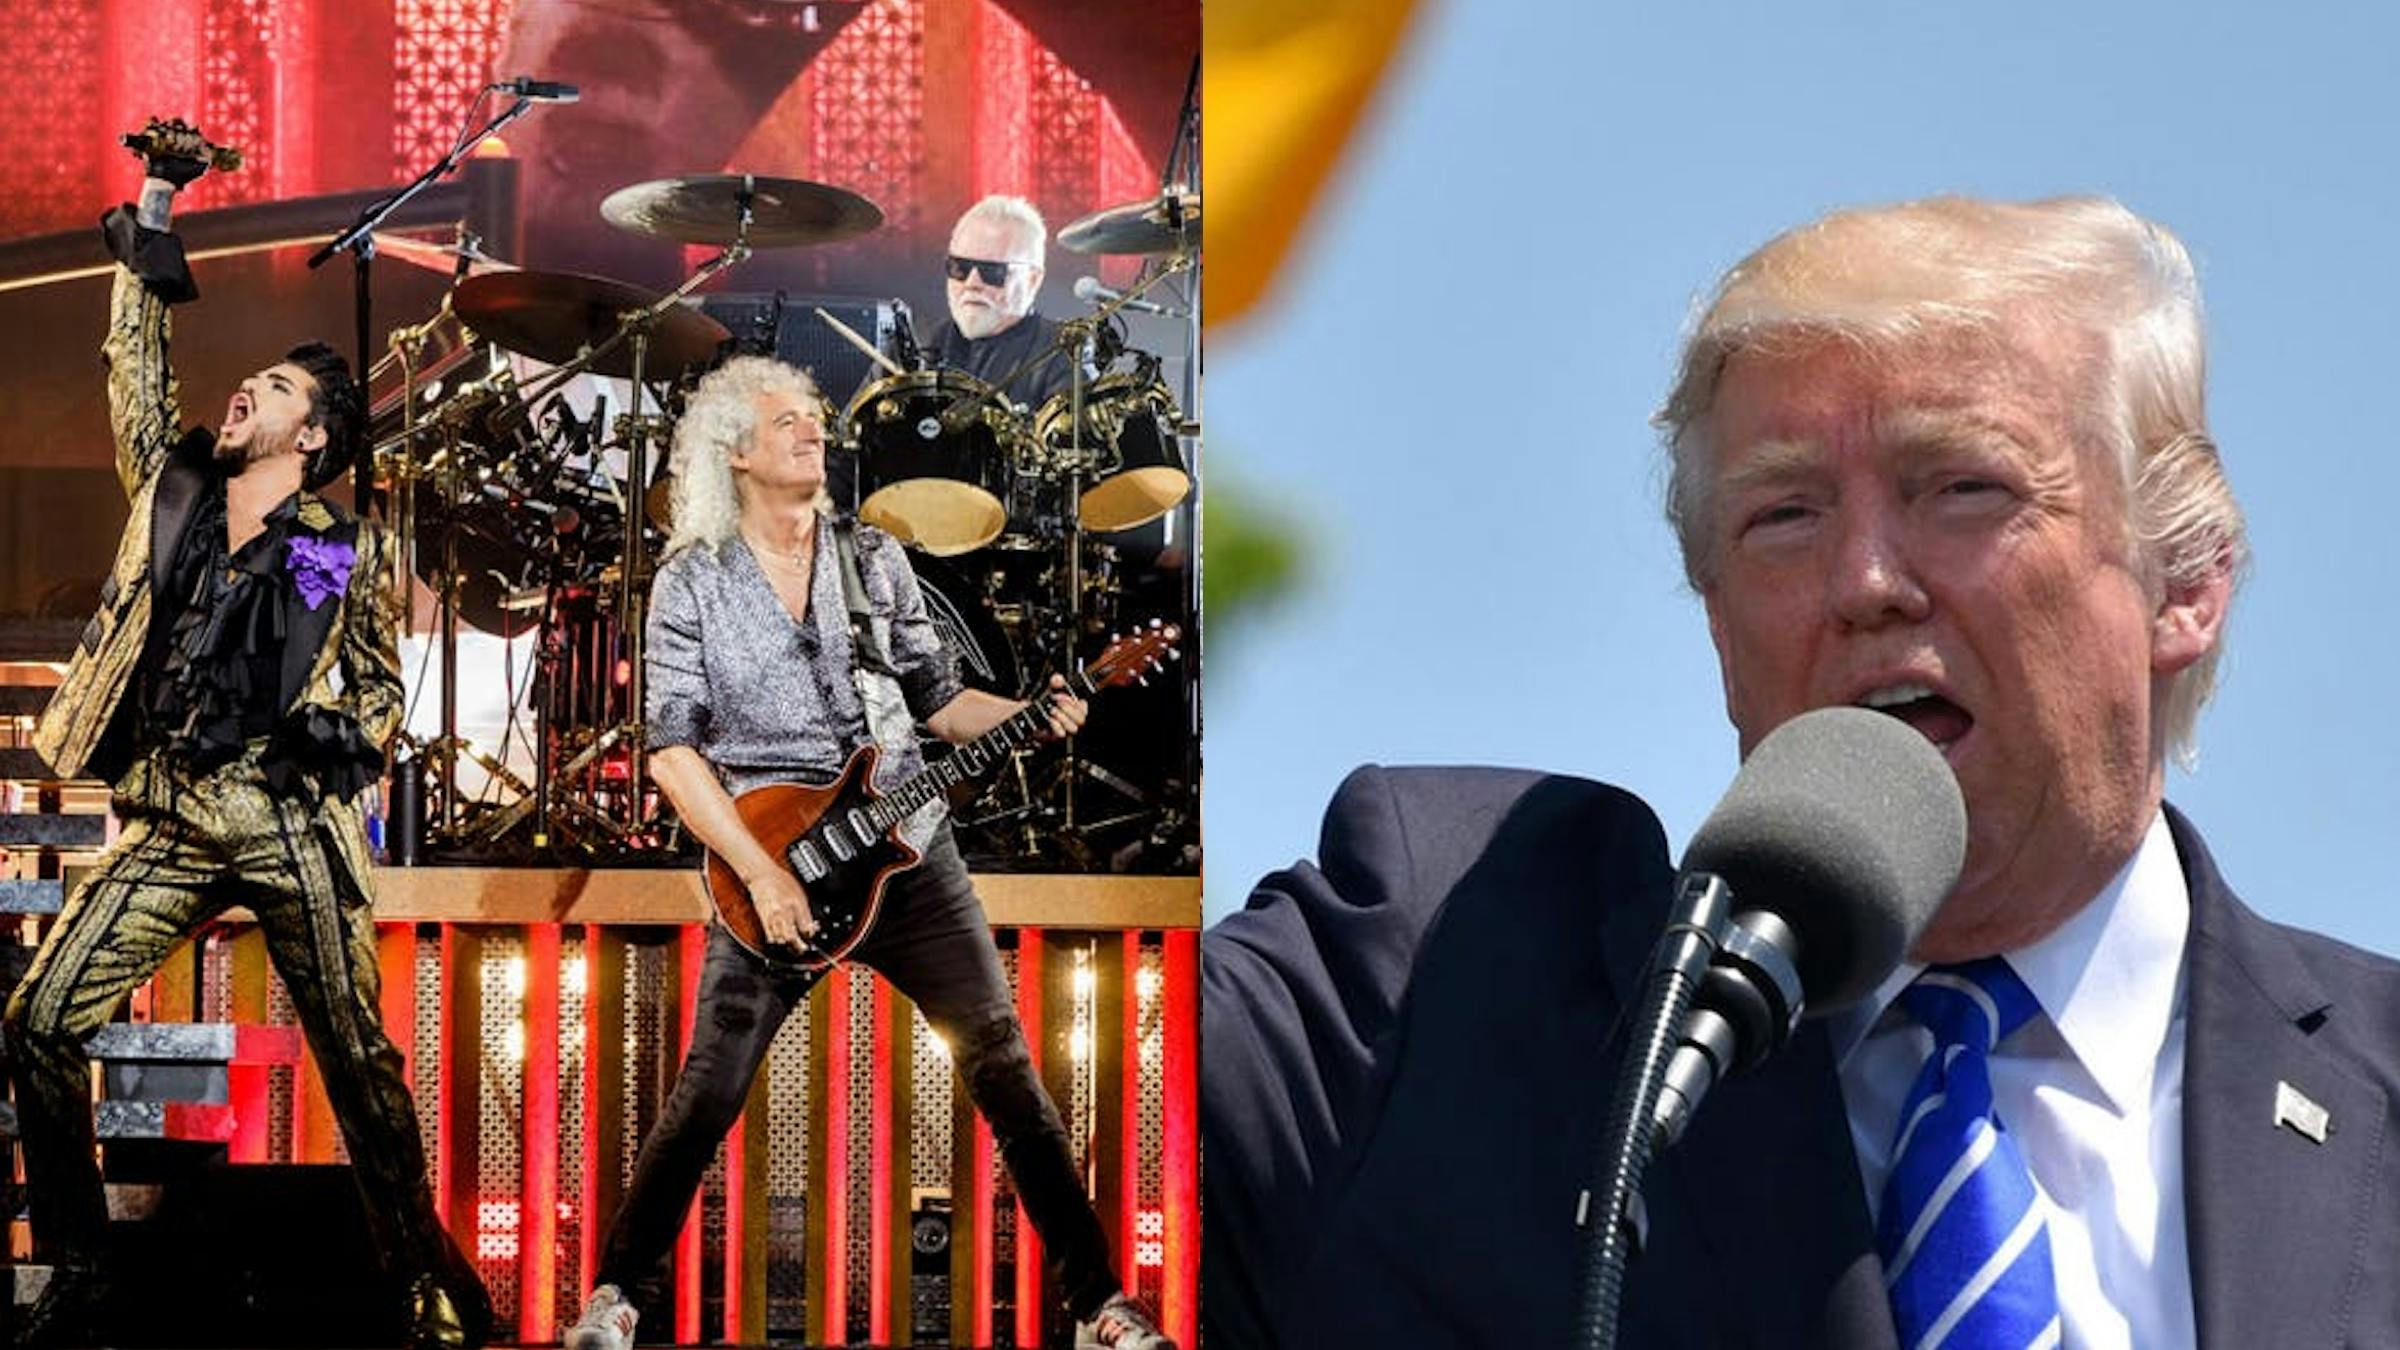 Queen Stop Donald Trump From Using We Will Rock You